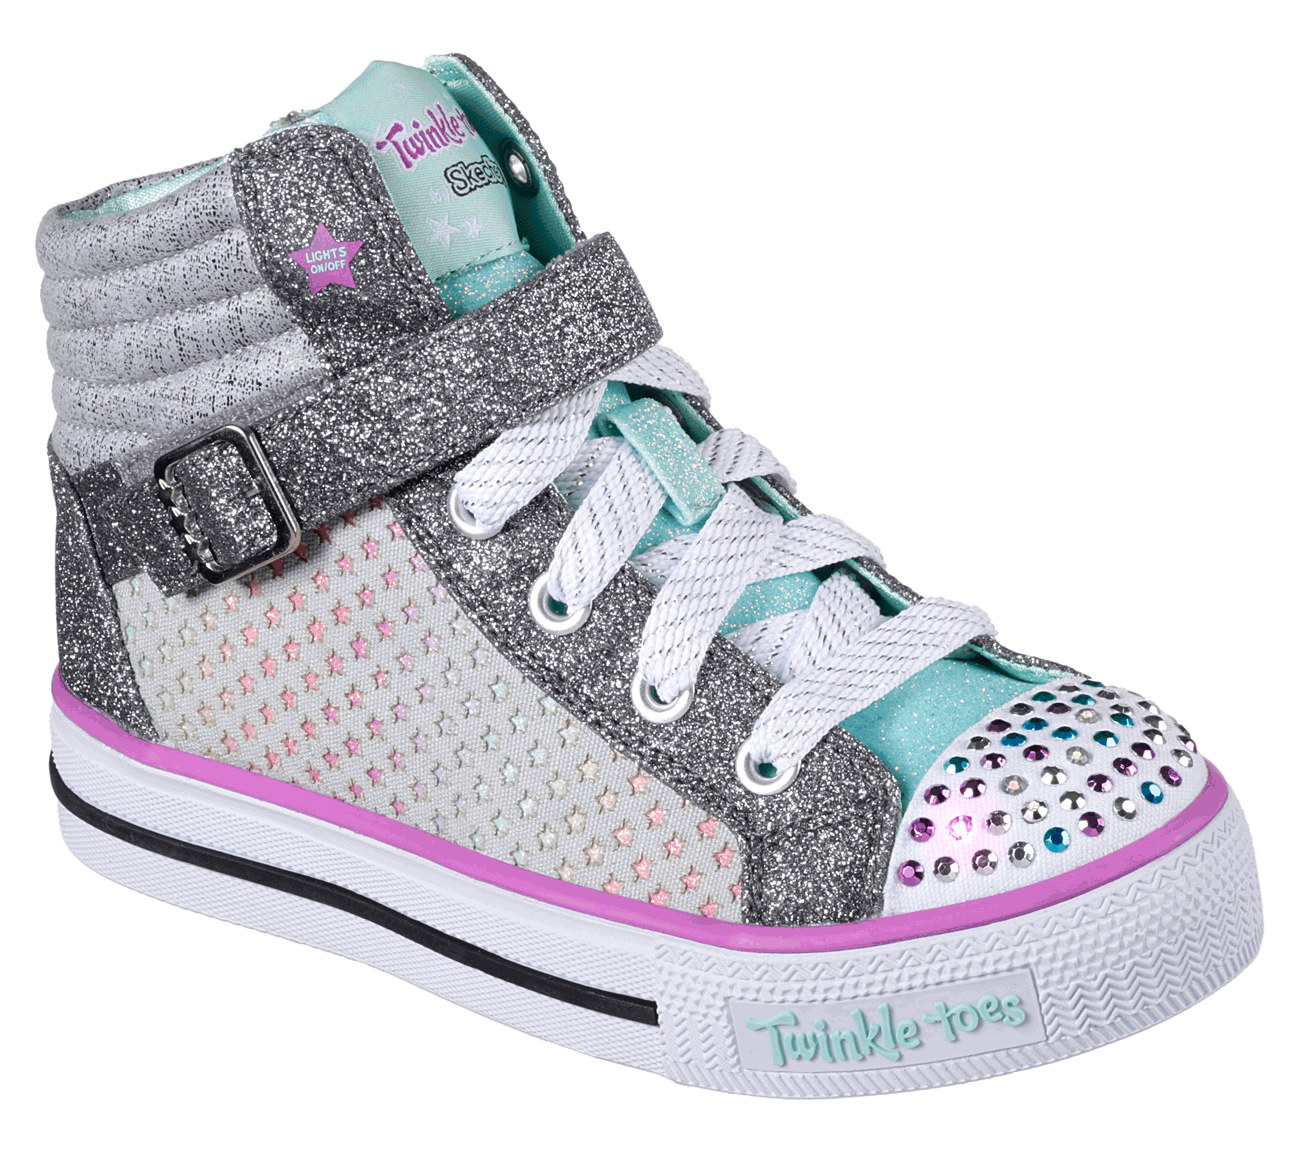 Buy SKECHERS Twinkle Toes: Shuffles - Star Steps S-Lights Shoes only $52.00